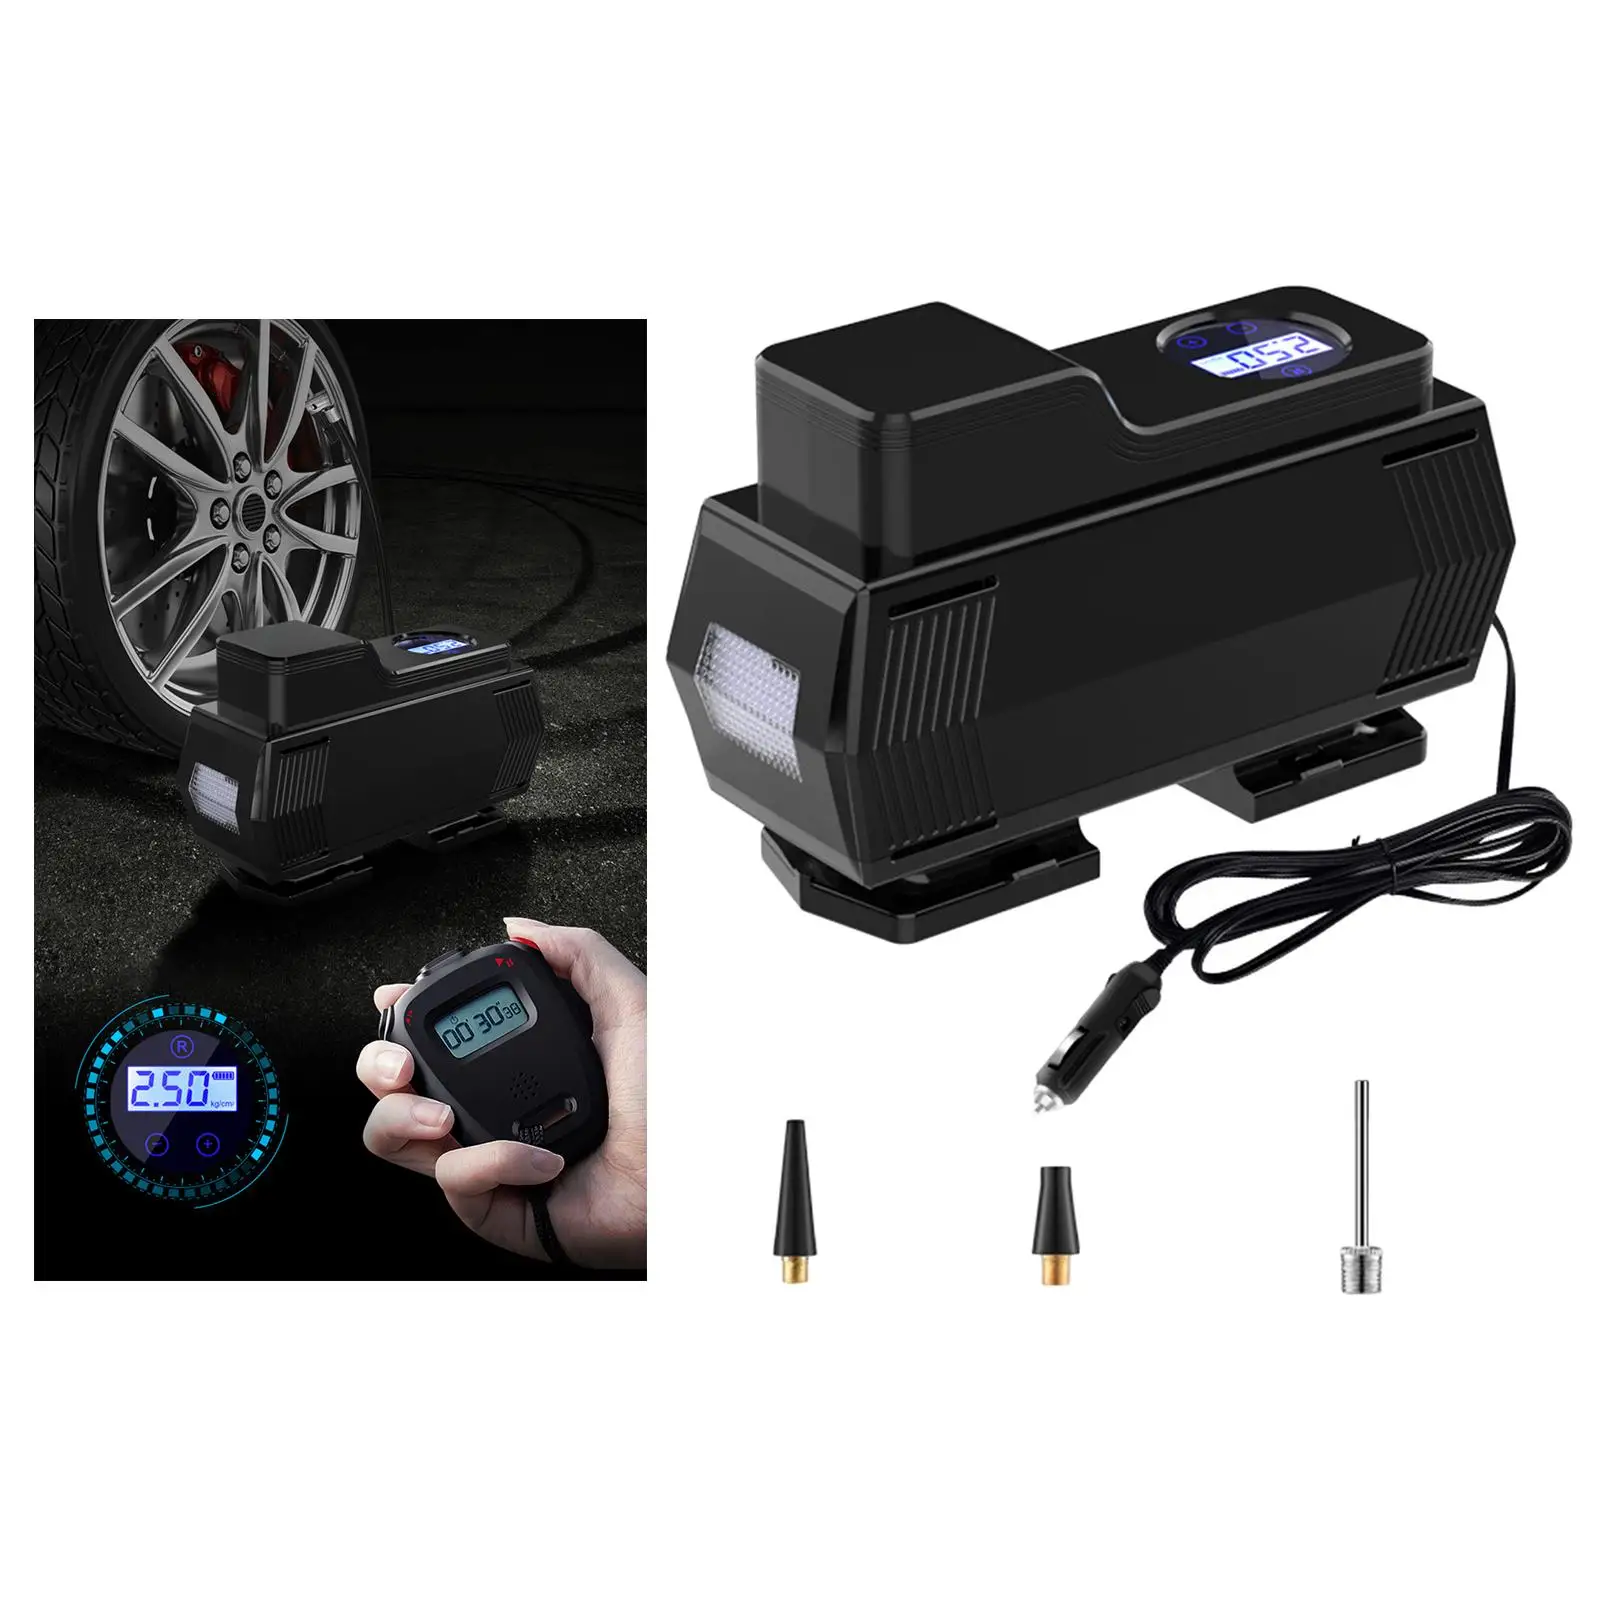 DC12V Automobile Tire Inflator Pump Air Compressor Pump Charging Pump Wired Tyre Inflater for Cars Motorcycles Auto